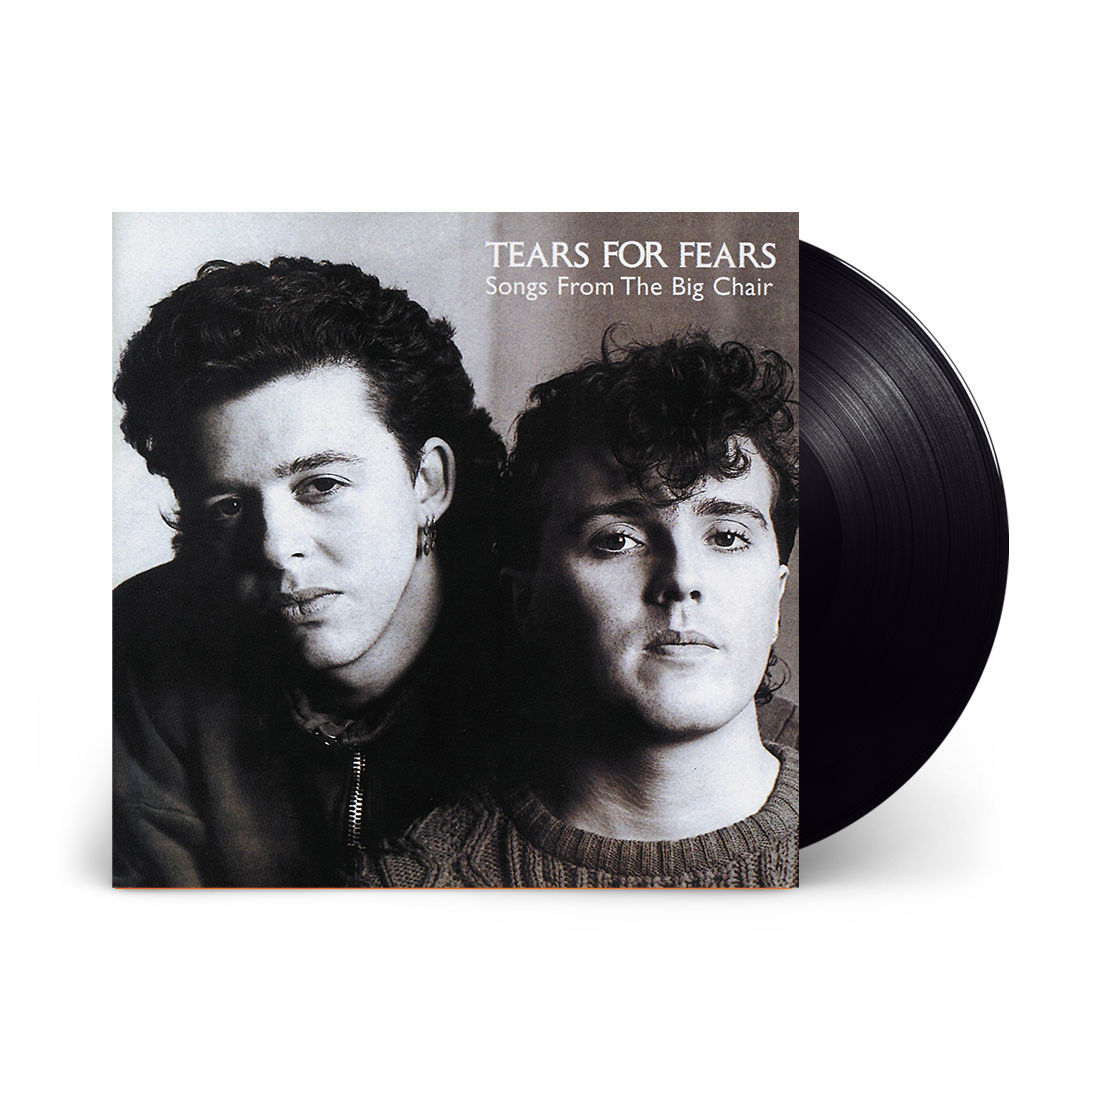 Fears　LP　Big　Songs　Vinyl　Tears　The　Chair:　Vinyl　For　of　from　Sound